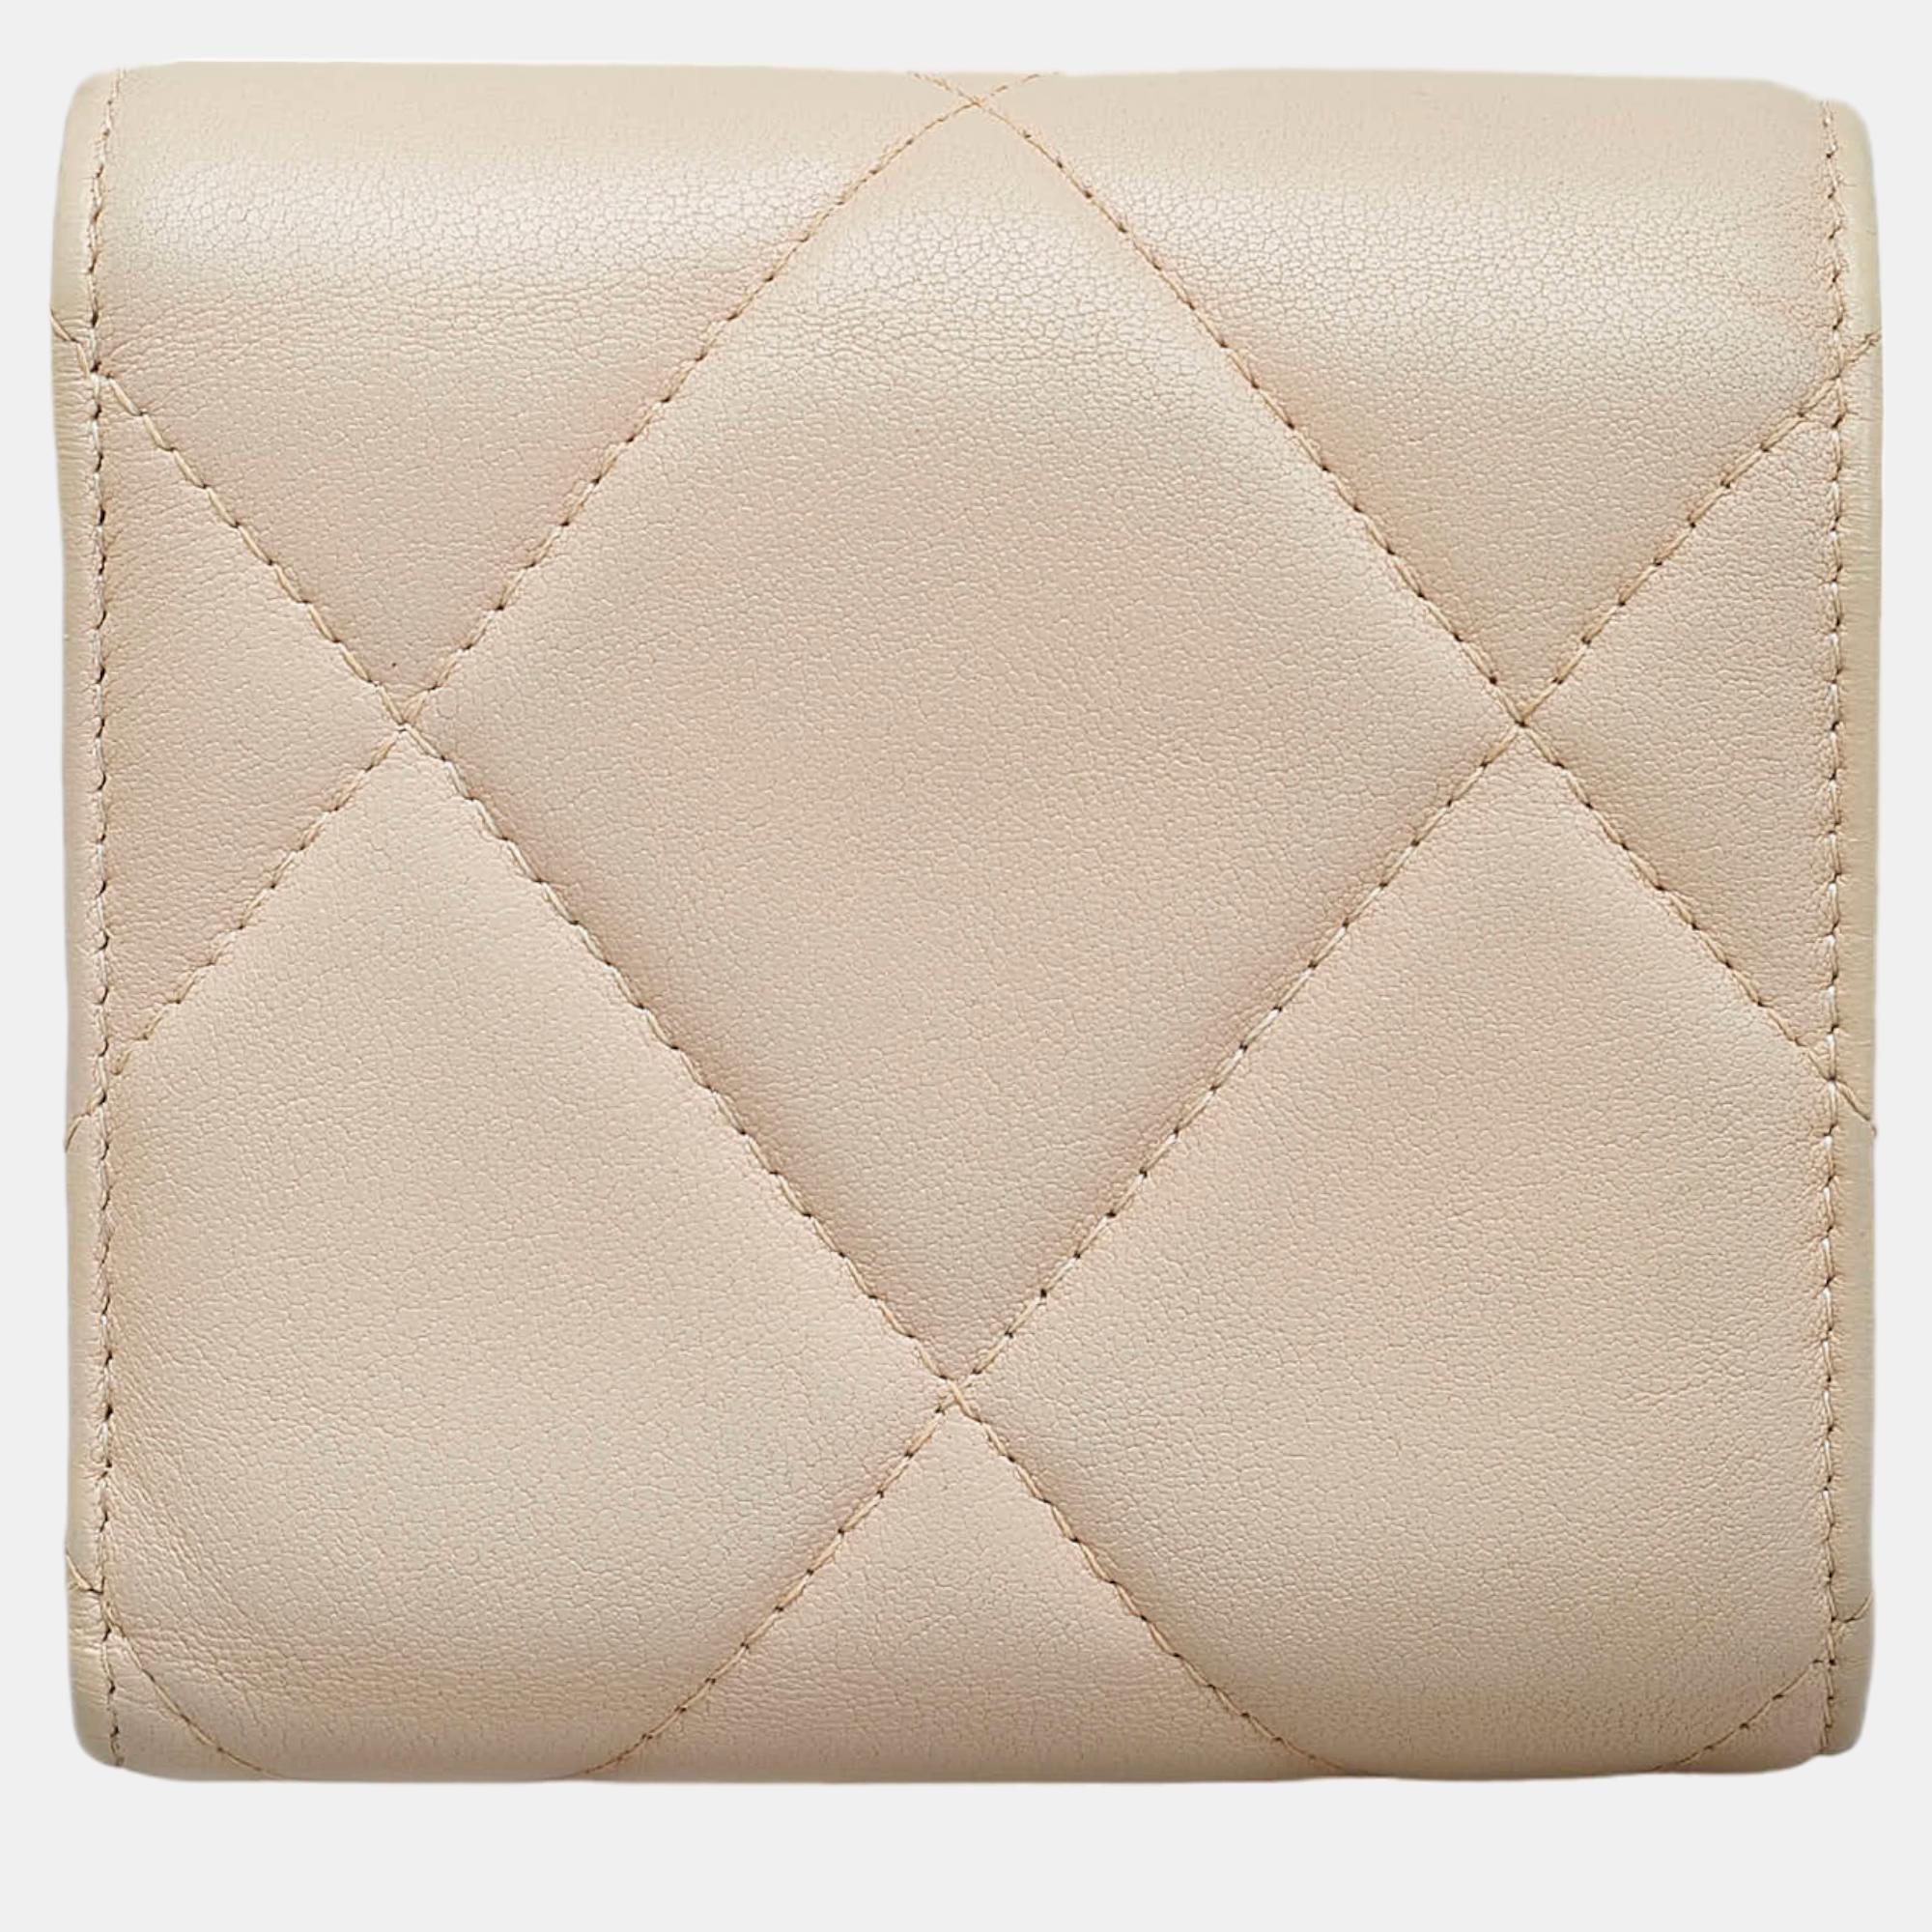 Chanel Beige 19 Trifold Flap Compact Wallet